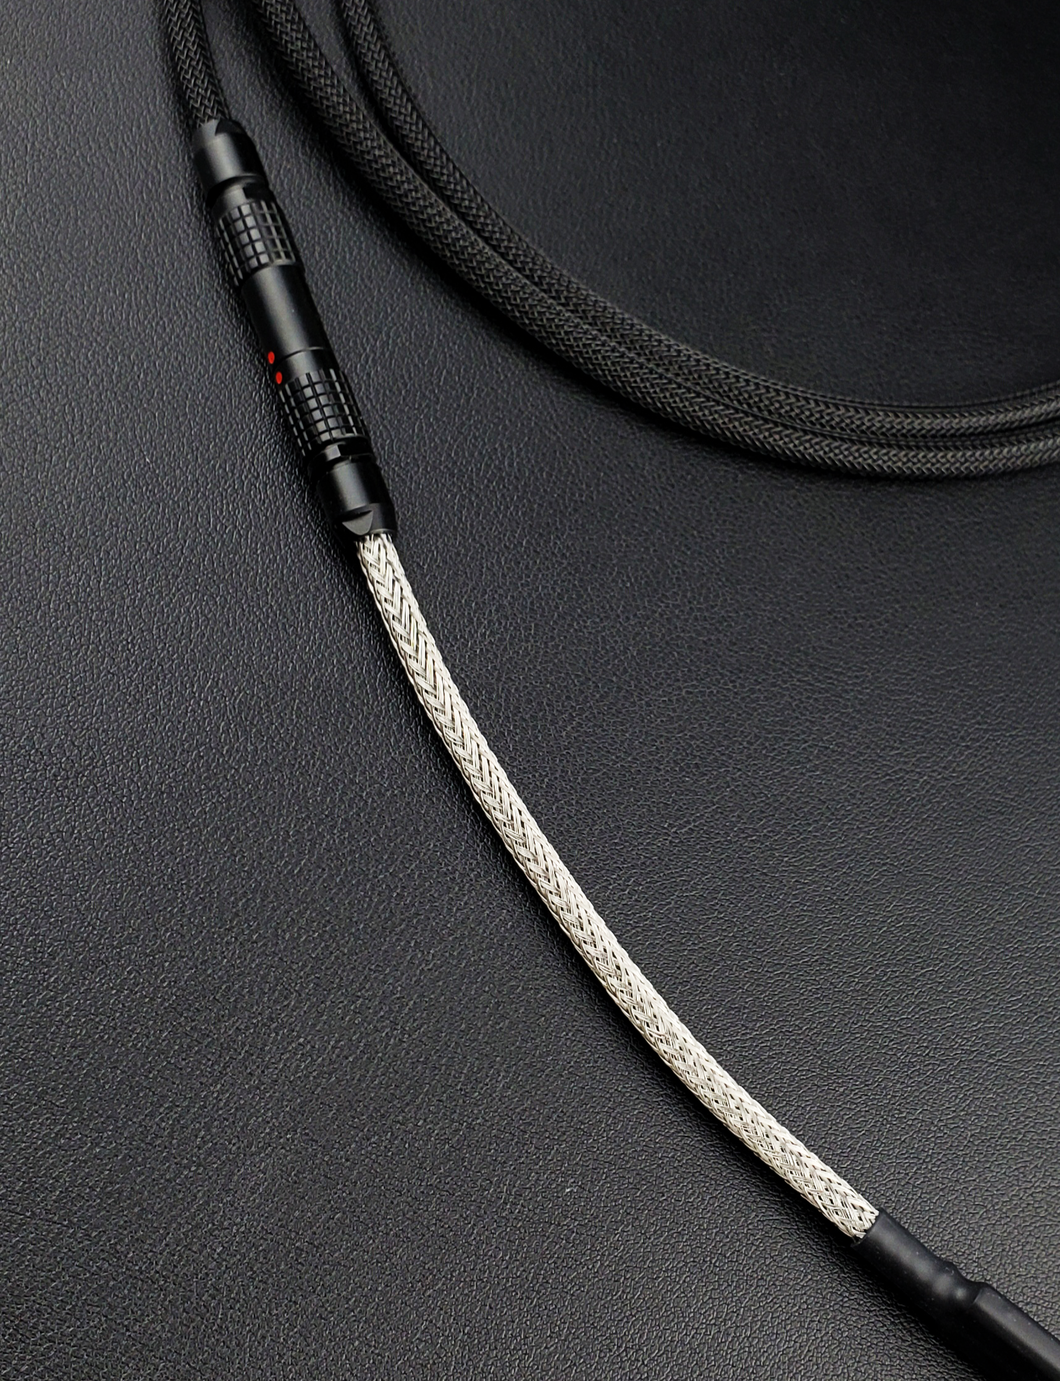 Stainless Steel Sleeved // straight cable // Black premium push/pull